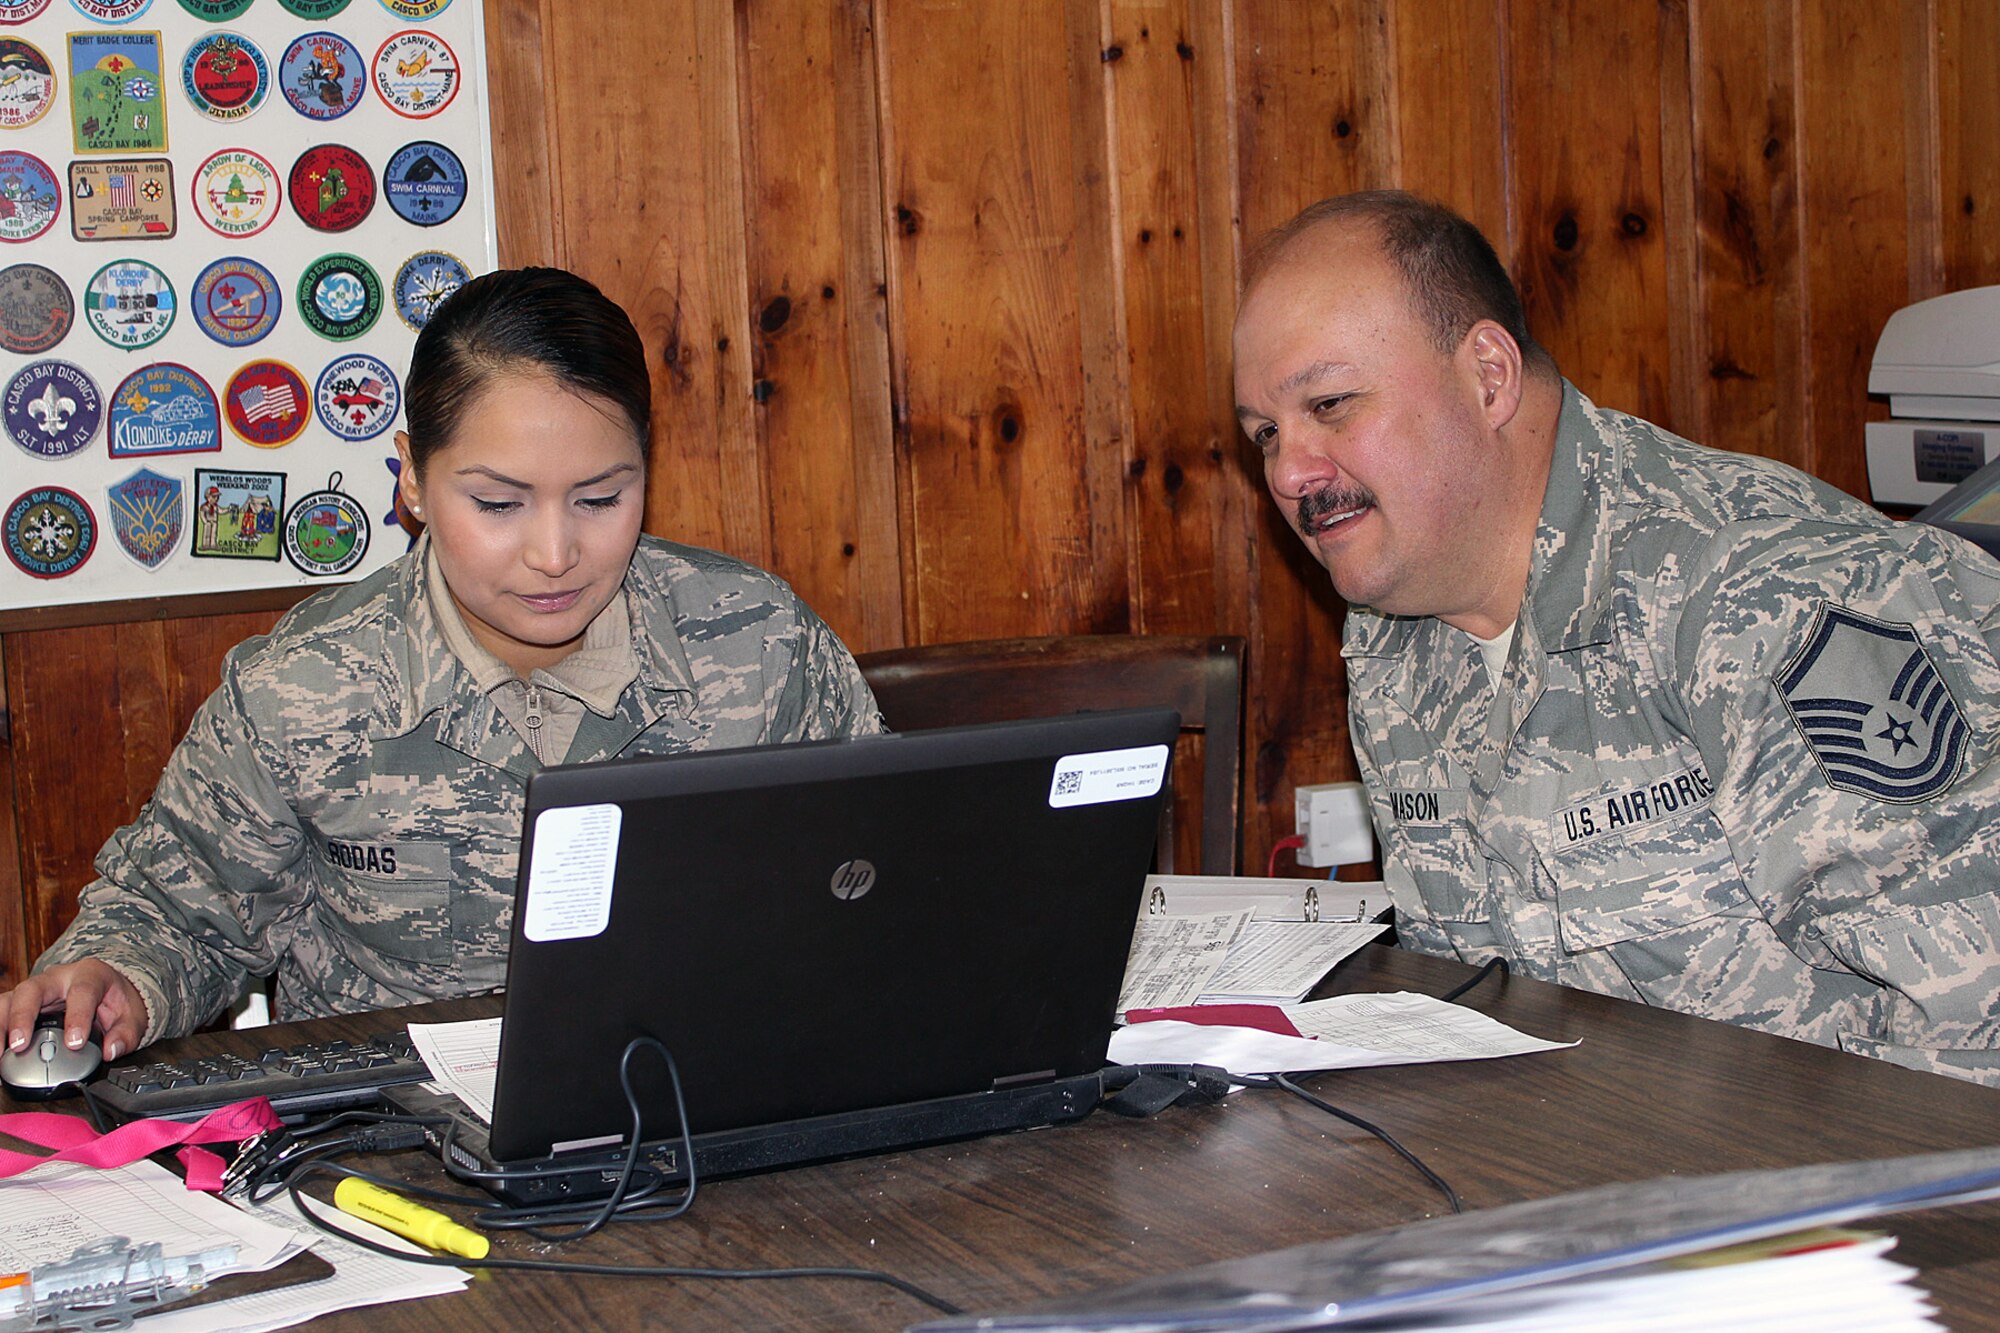 140528-Z-VA676-064  Senior Airman Audry Rodas and Master Sgt. Benjamin Mason work together to order food supplies for military personnel while at Camp Hinds Boy Scout camp, Raymond, Maine, May 28, 2014. The Airmen are part of an Innovative Readiness Training mission at the camp, which allows military personnel to get training in various tasks and a community organization, in this case the Boy Scouts, to benefit from the work. Air National Guard, Marine and Army Reserve units from about a dozen different states will be working on a construction project at the camp during summer 2014. Rodas is a member of the 143rd Force Support Squadron, Rhode Island Air National Guard. Mason is with the 127th FSS, Michigan ANG. The two units are working together to prepare and serve meals for military personnel working at the camp. (U.S. Air National Guard photo by Technical Sgt. Dan Heaton)